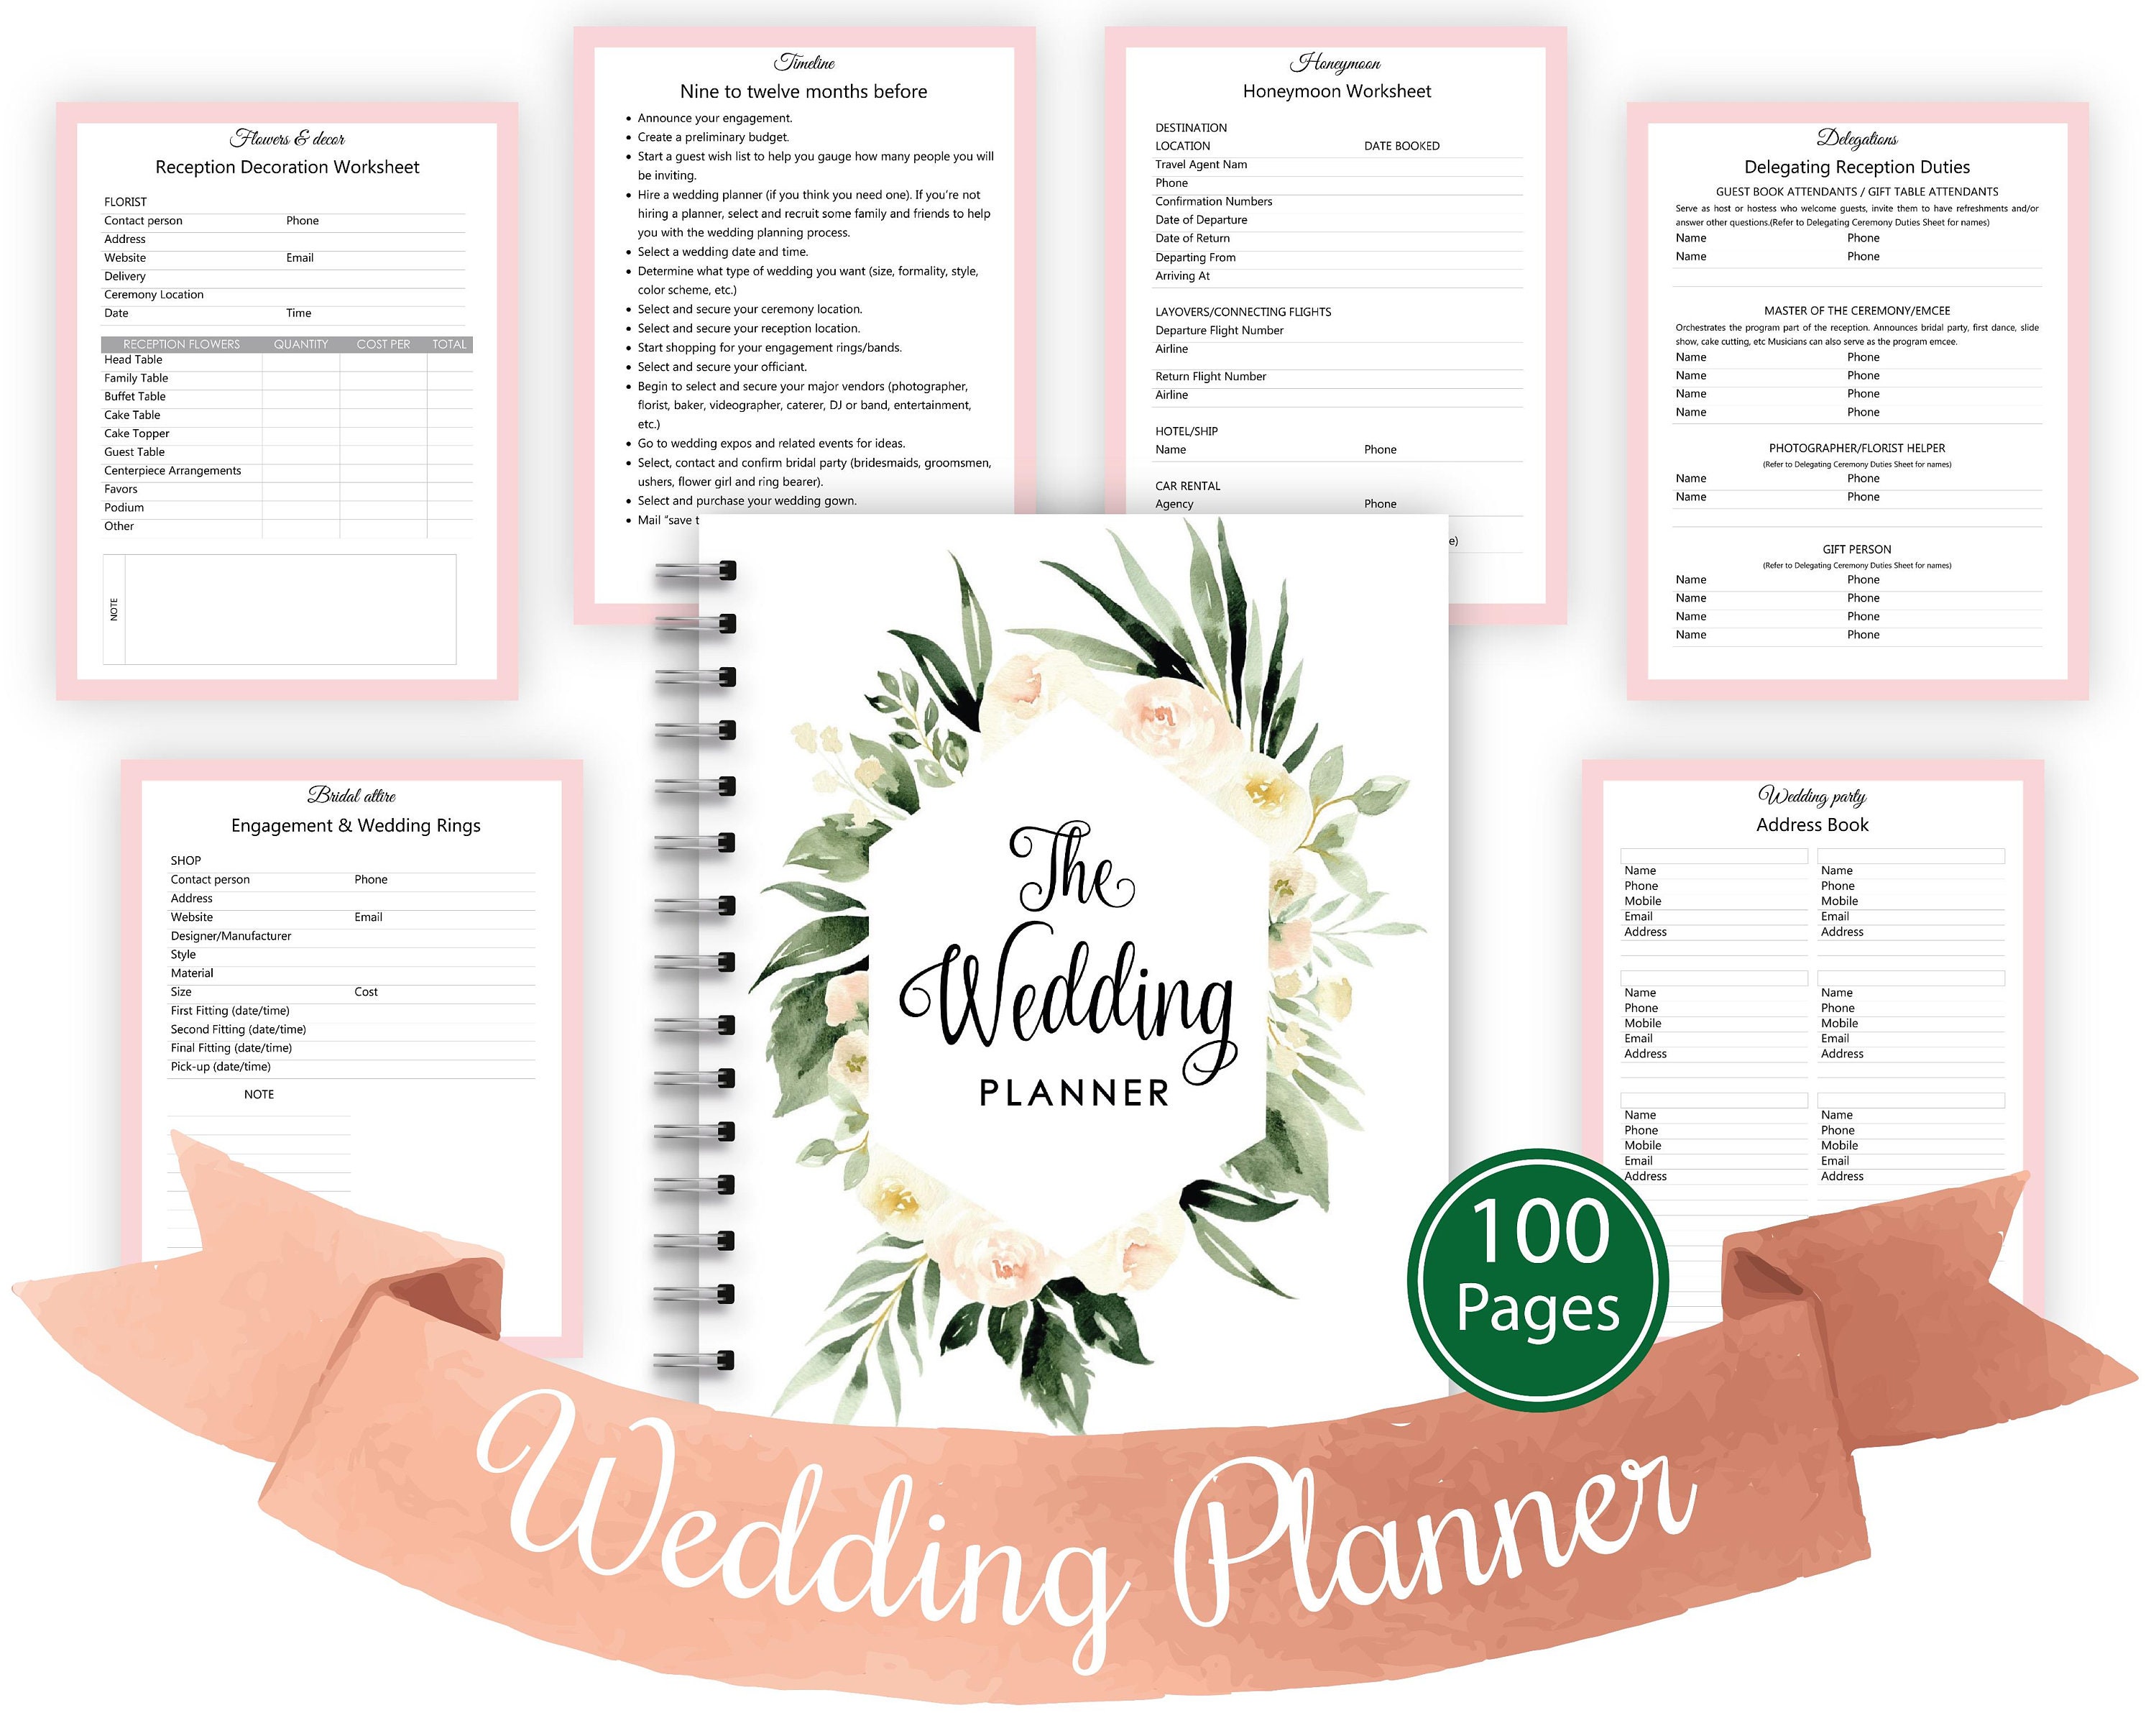 research on wedding planner